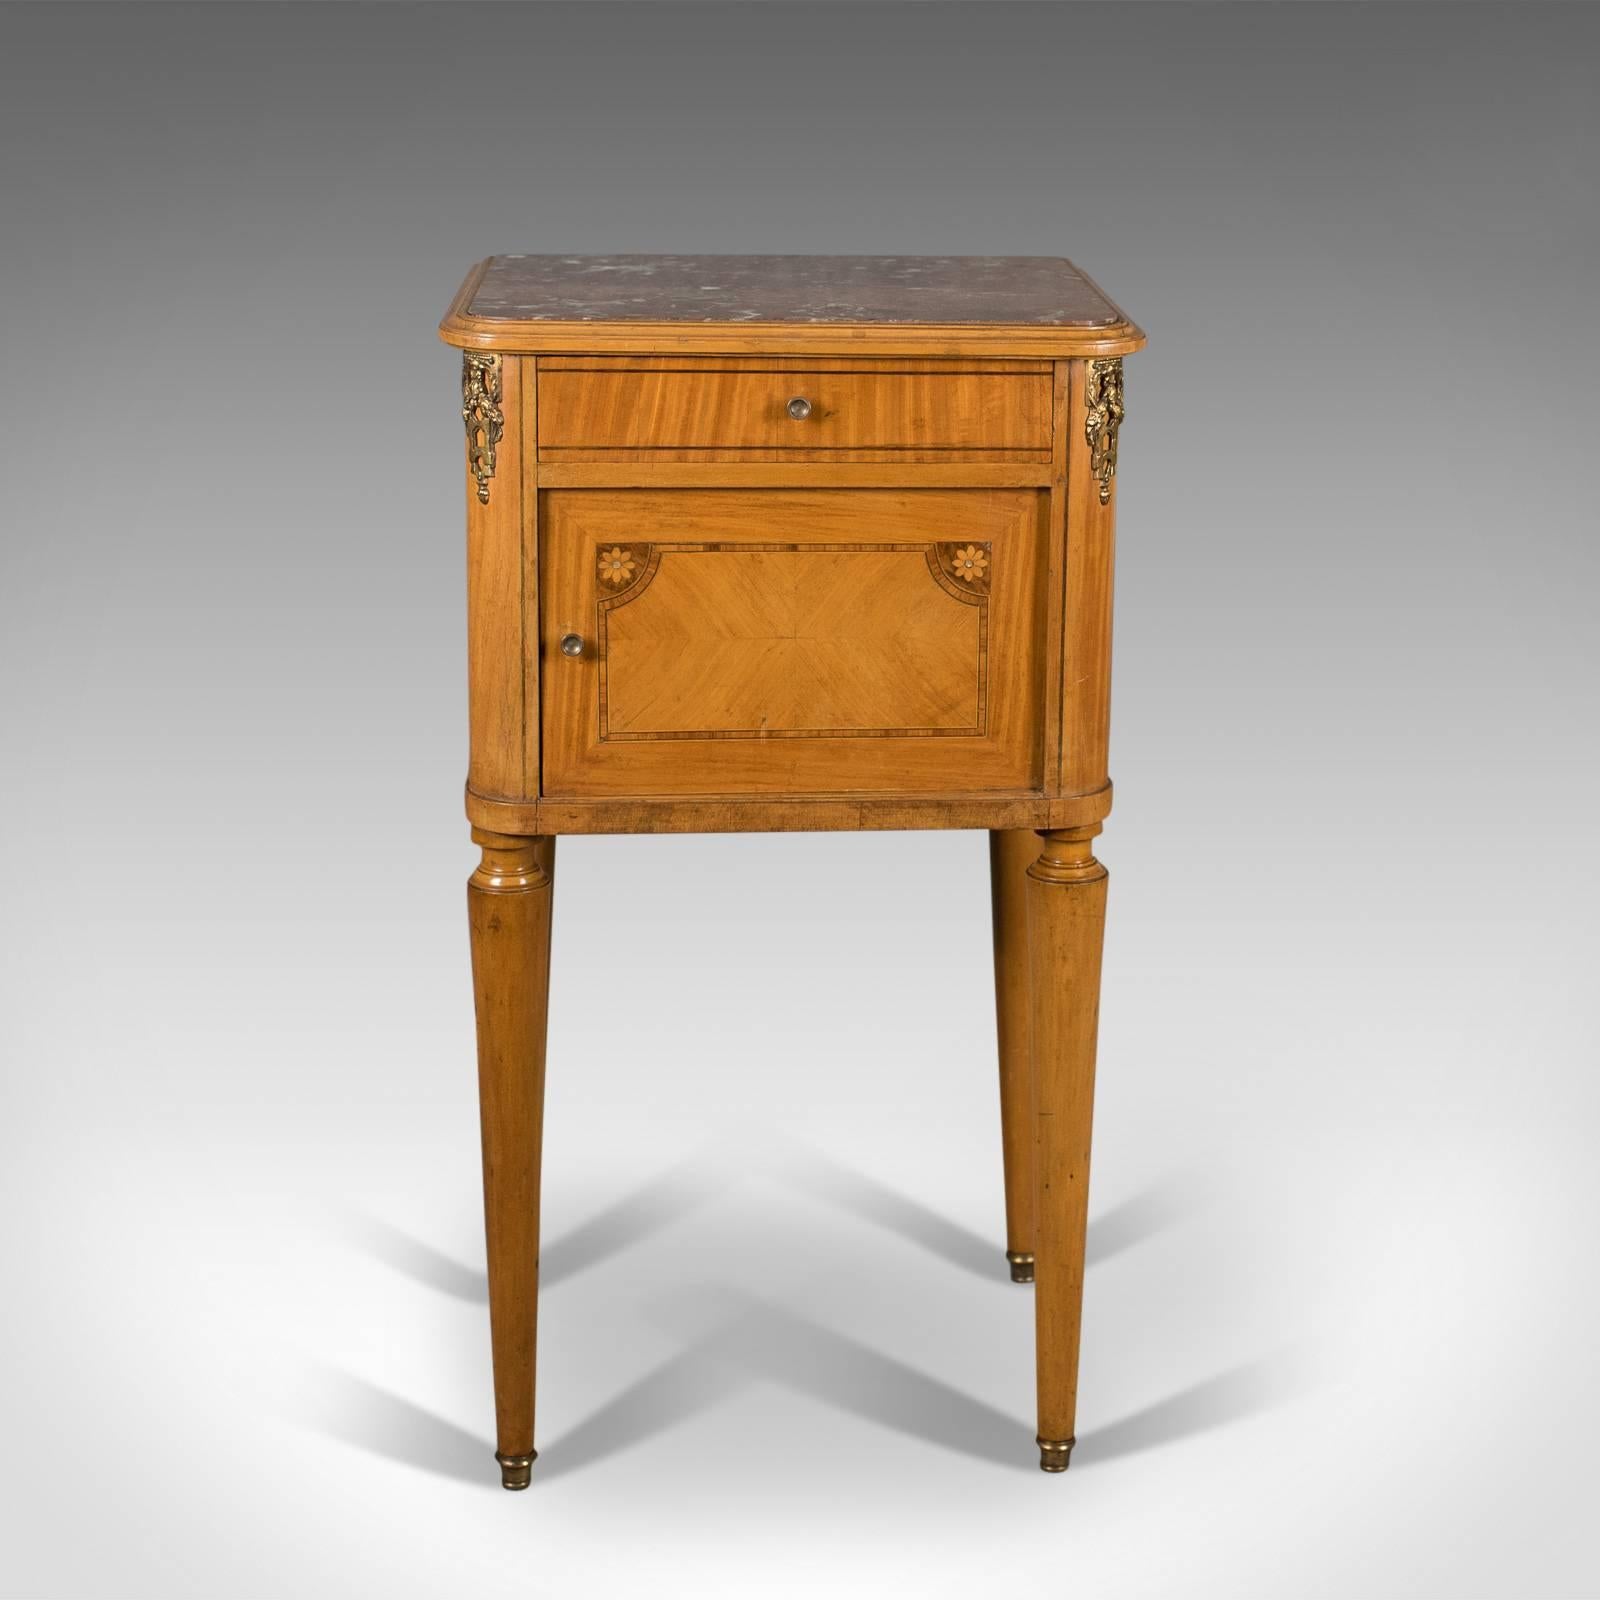 This is a French antique bedside cabinet, a marble top nightstand dating to the late 19th century, circa 1890.

Appealing biscuit tones to the light walnut finish
Attractive grain in the quartered veneered decoration
Well veined blush marble top